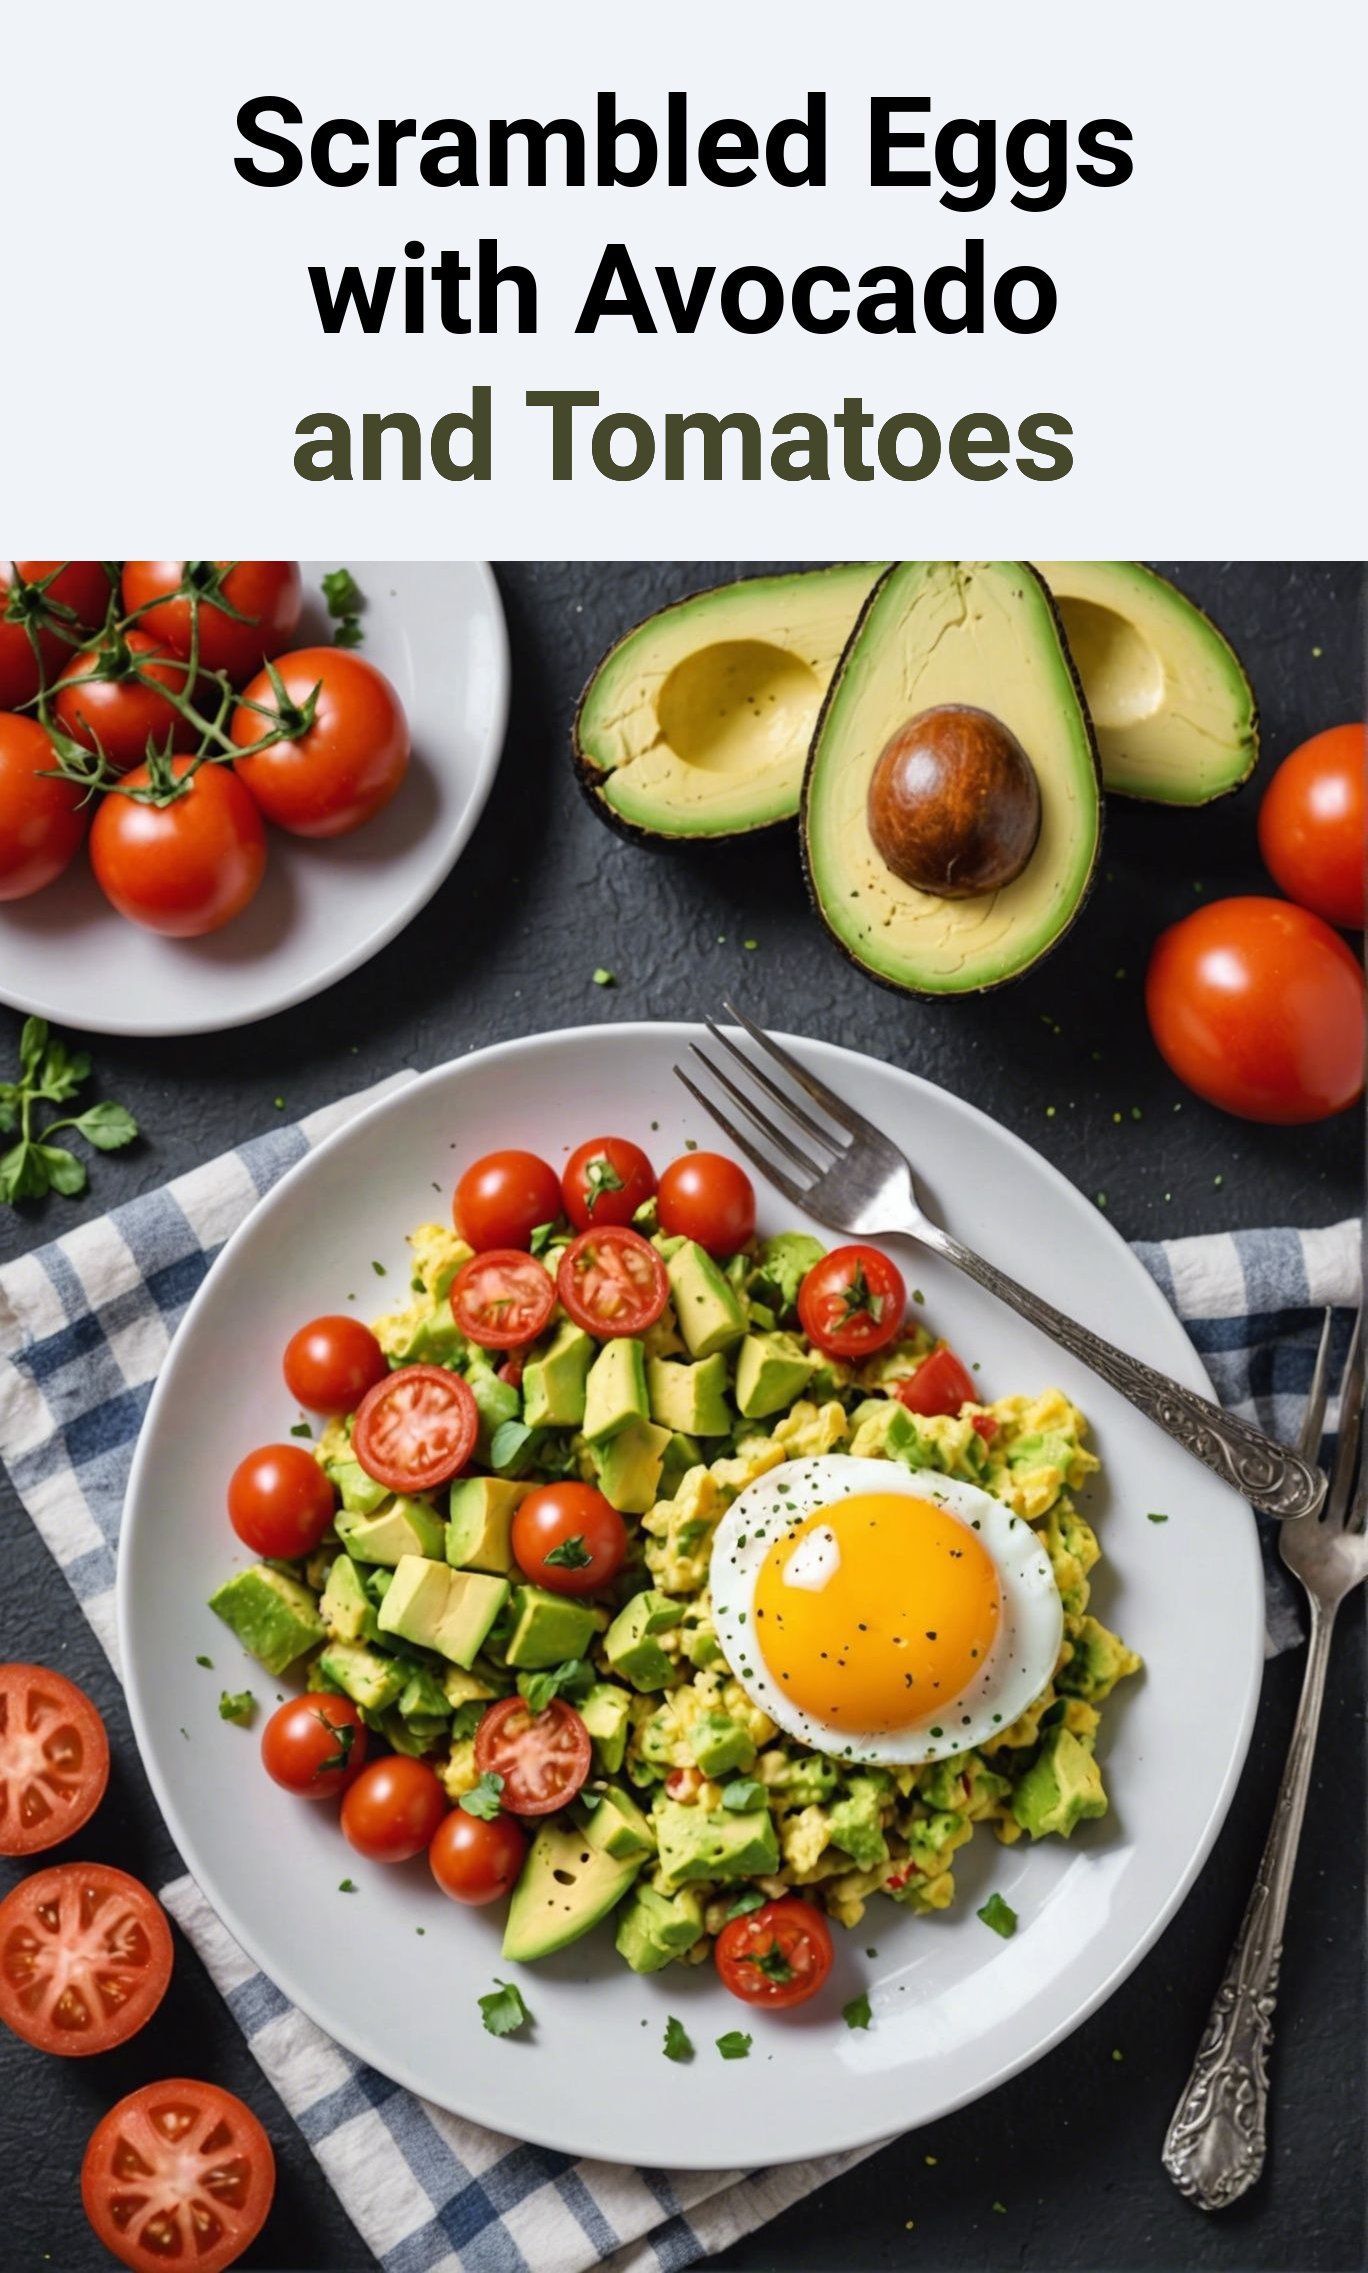 Scrambled Eggs with Avocado and Tomatoes